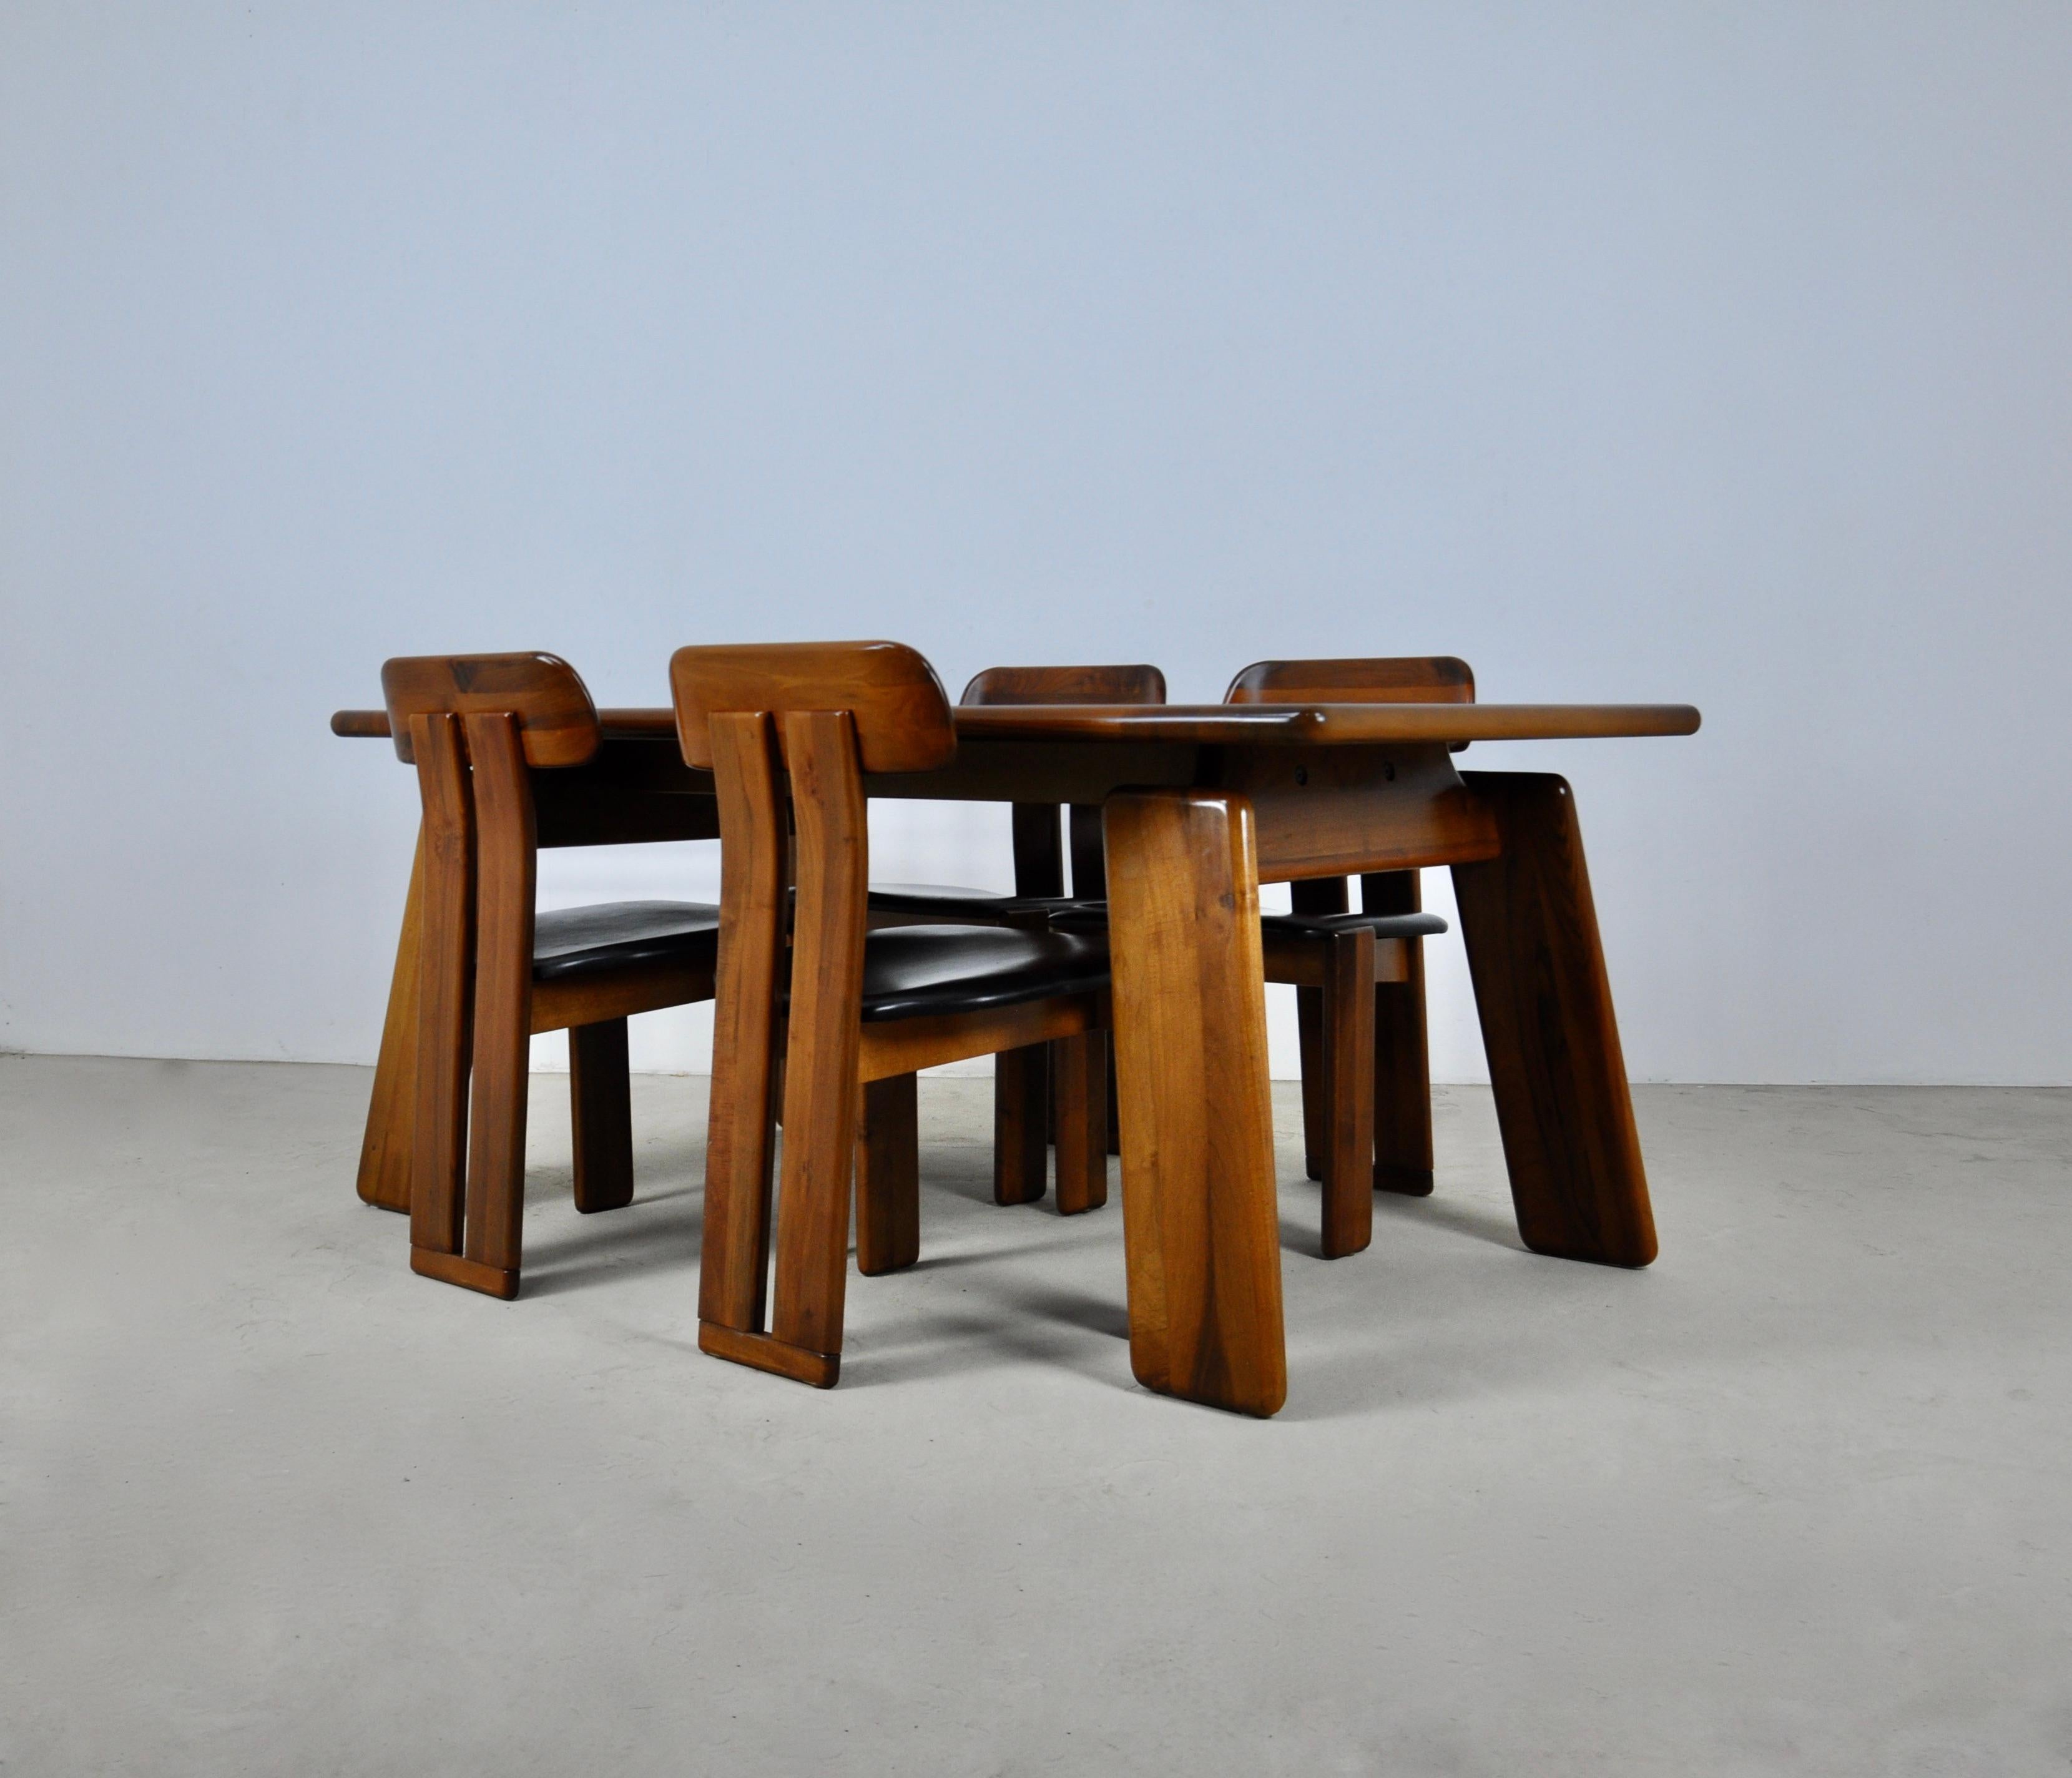 Dining set composed of 4 wooden and leather chairs and a wooden table from the Sapporo collection by Mario Marenco.

Dimensions of the chairs: height: 82 cm Width: 50cm Depth: 52cm Seat height: 45 cm

Table dimensions: Height: 75 cm Width: 180cm